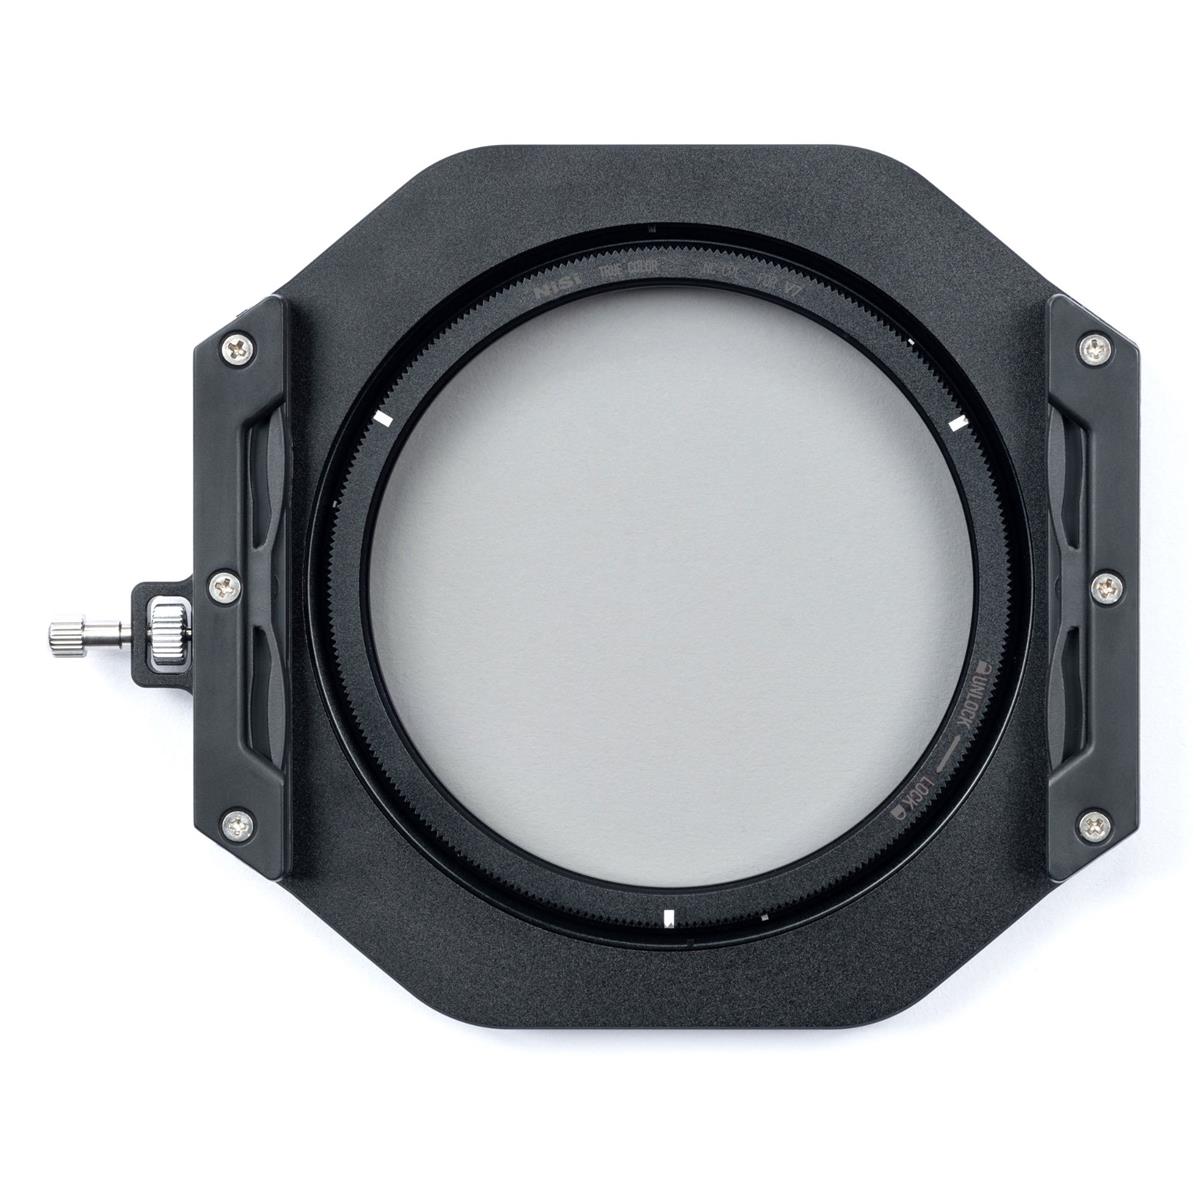 NiSi V7 100mm Filter Holder Kit with True Color NC Circular Polarizer and Lens Cap